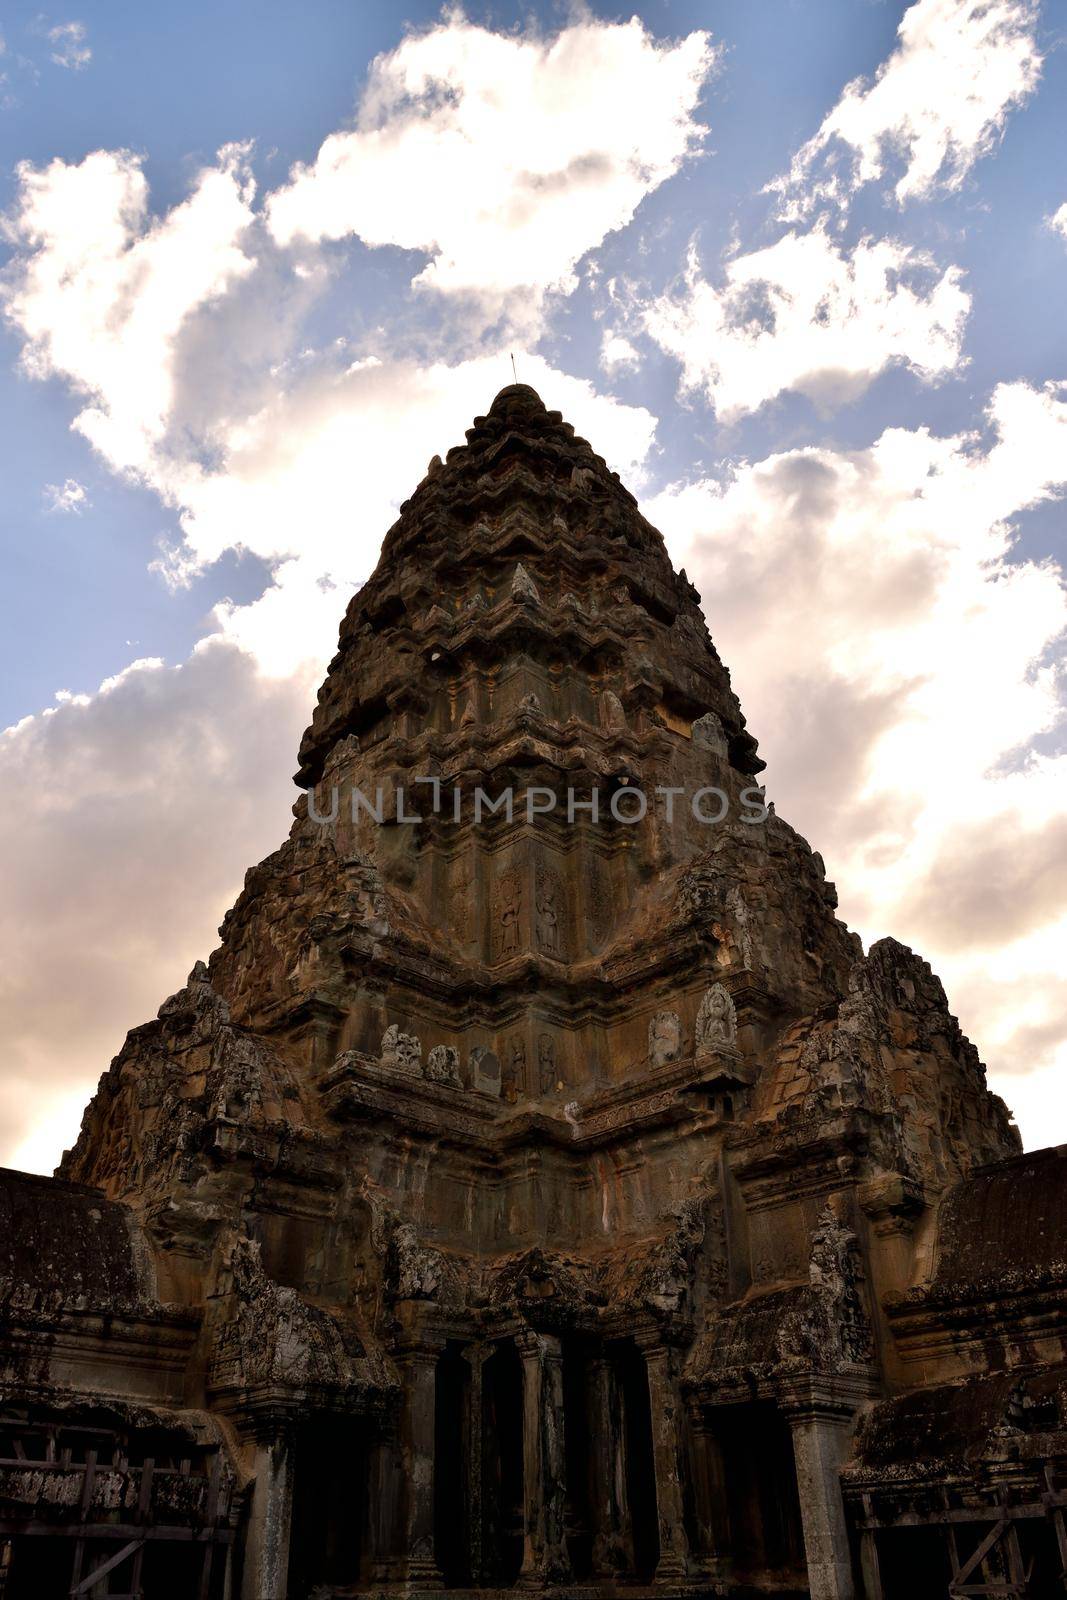 View of the temple from the beautiful temple of Angkor Wat by silentstock639